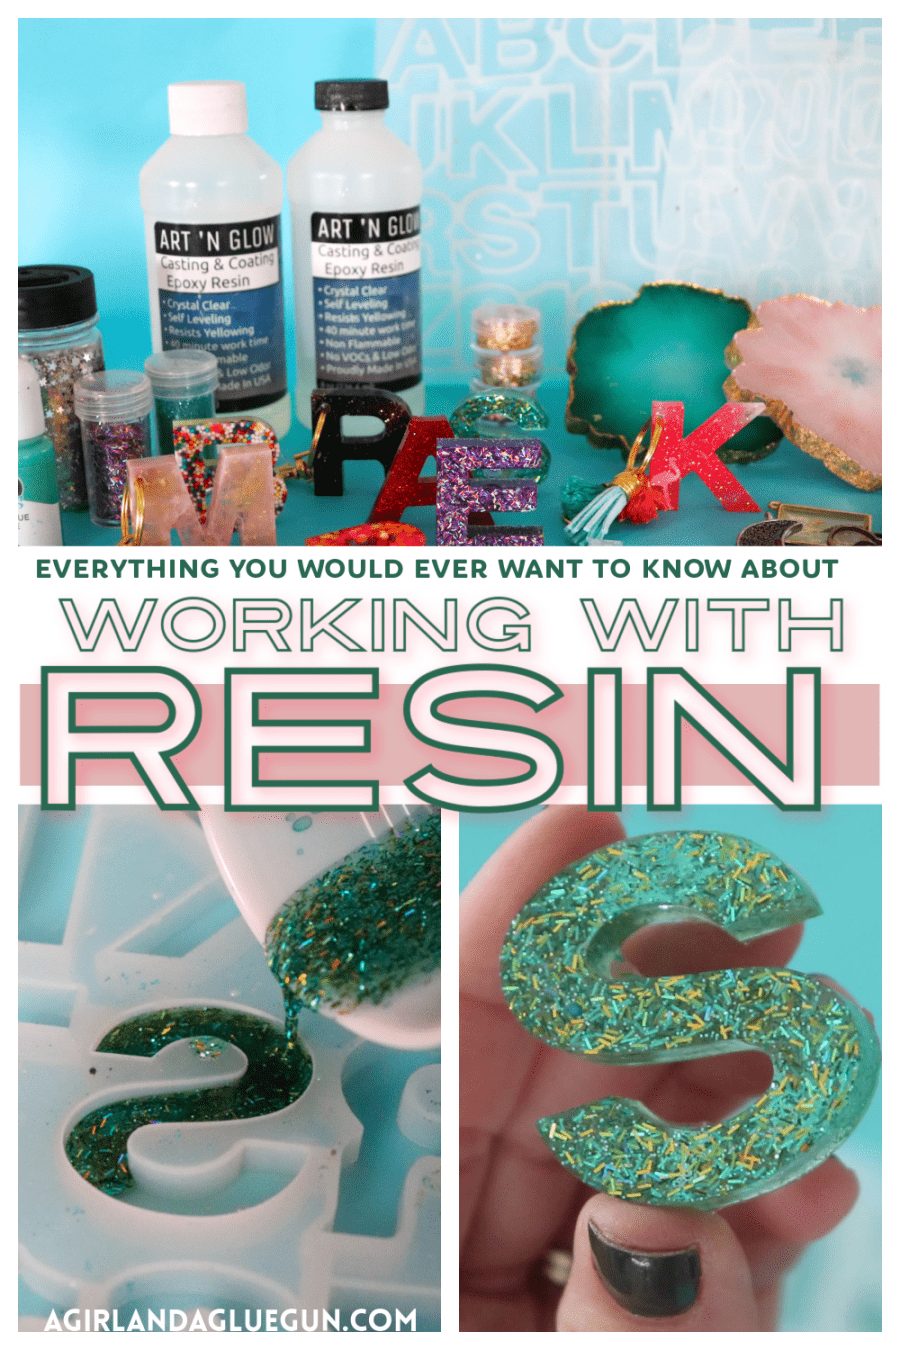 How to make Resin and Epoxy crafts - A girl and a glue gun